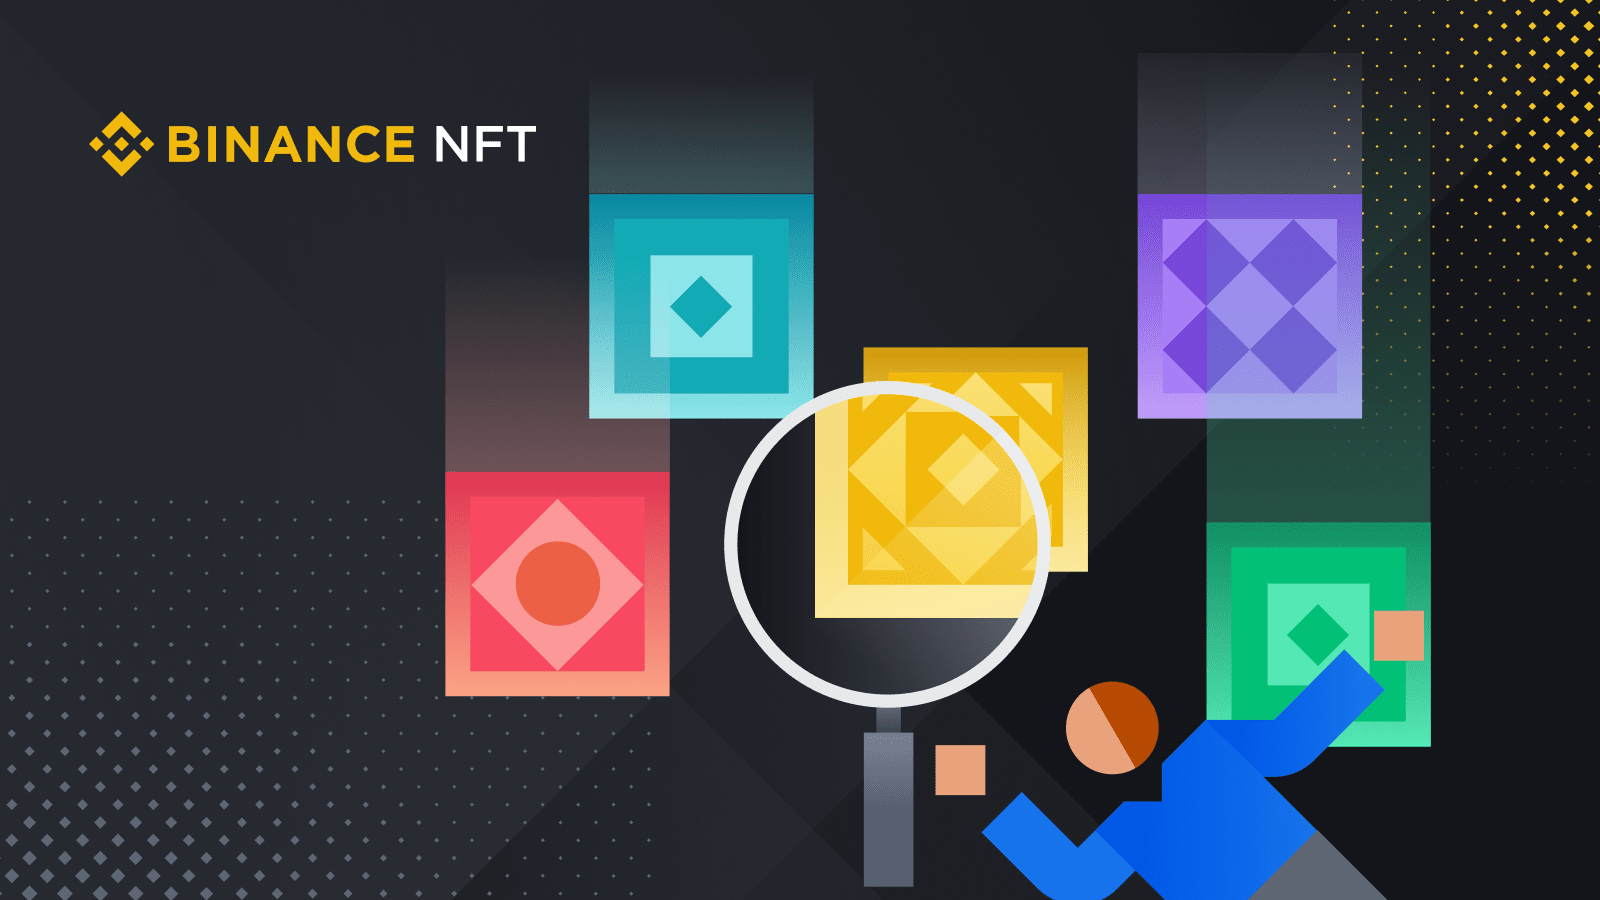 How to Do Your Own Research (DYOR) on NFT Projects